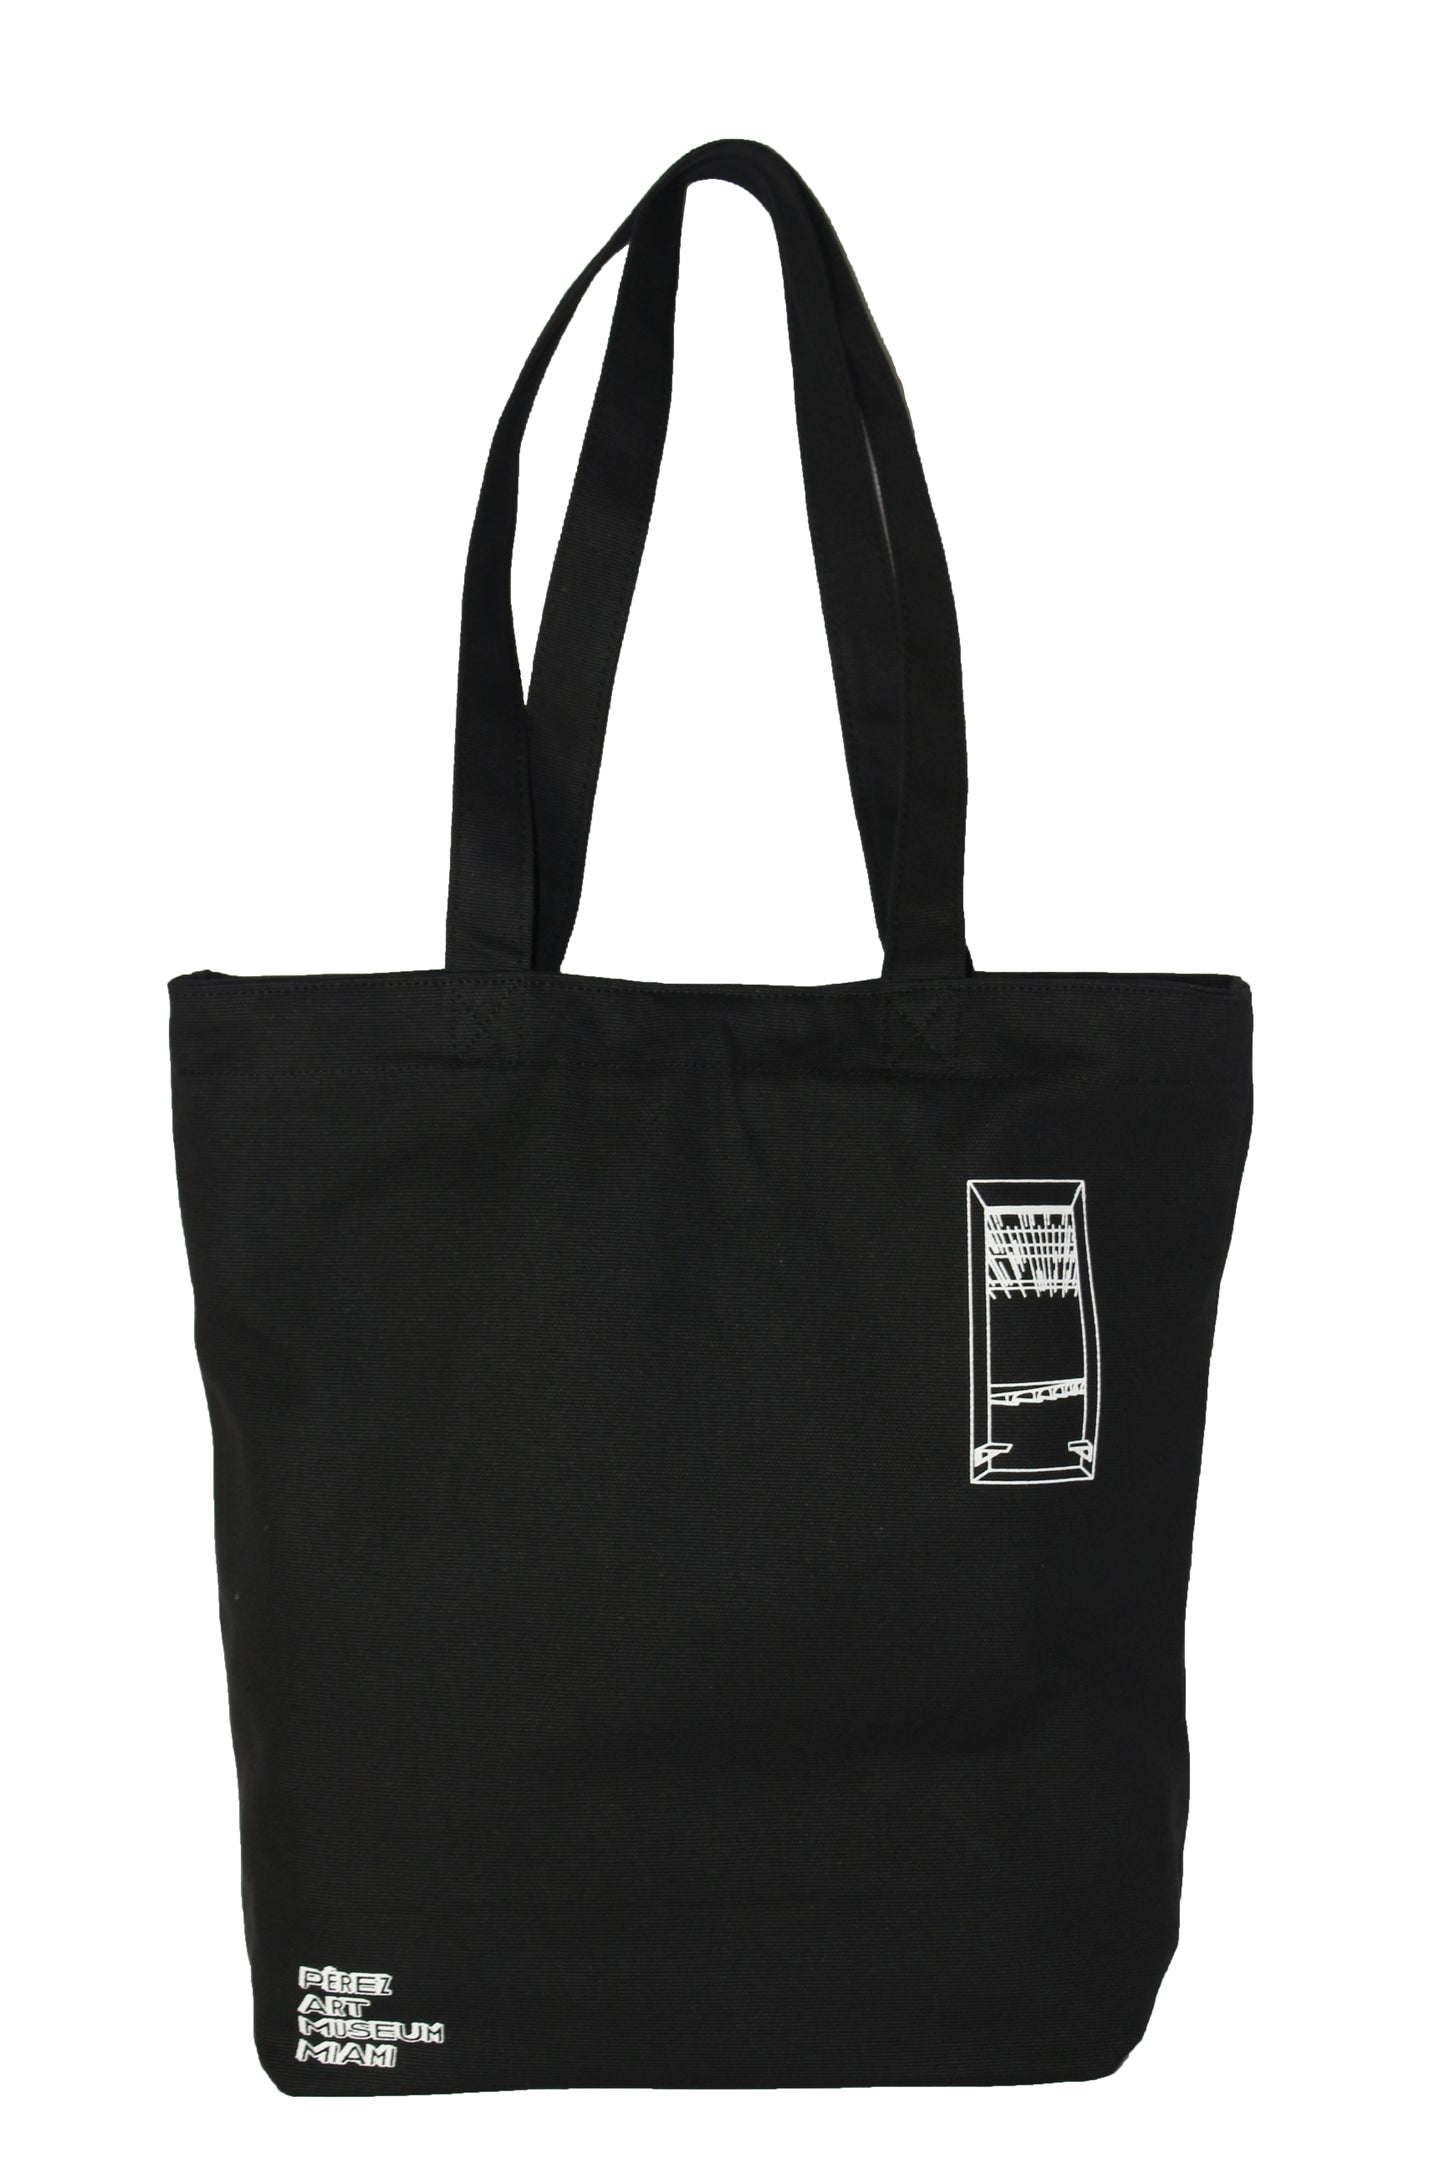 PAMM Building Tote